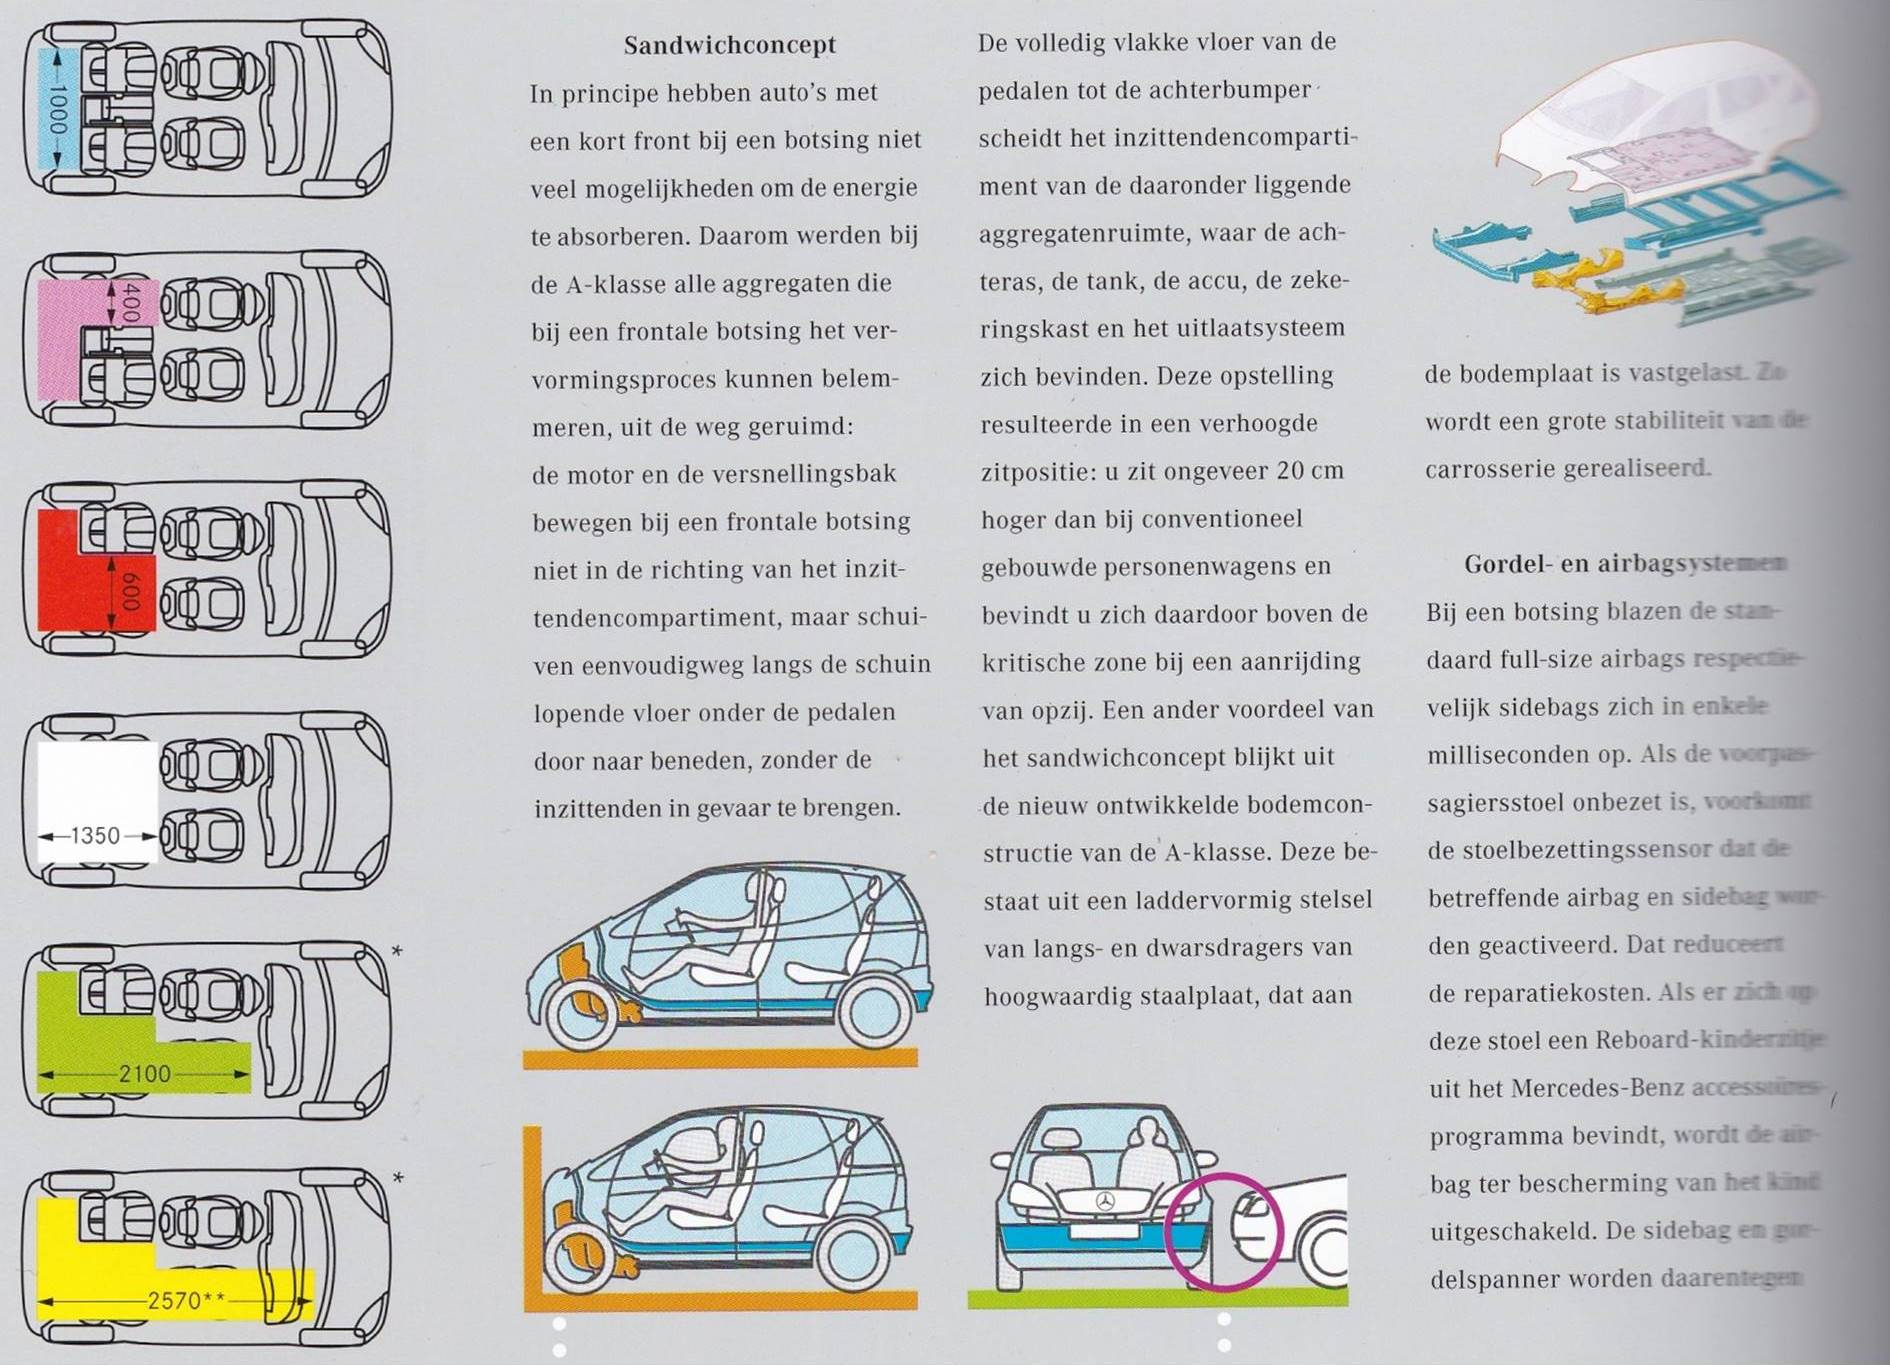 Extracts from a brochure with text and schematic images